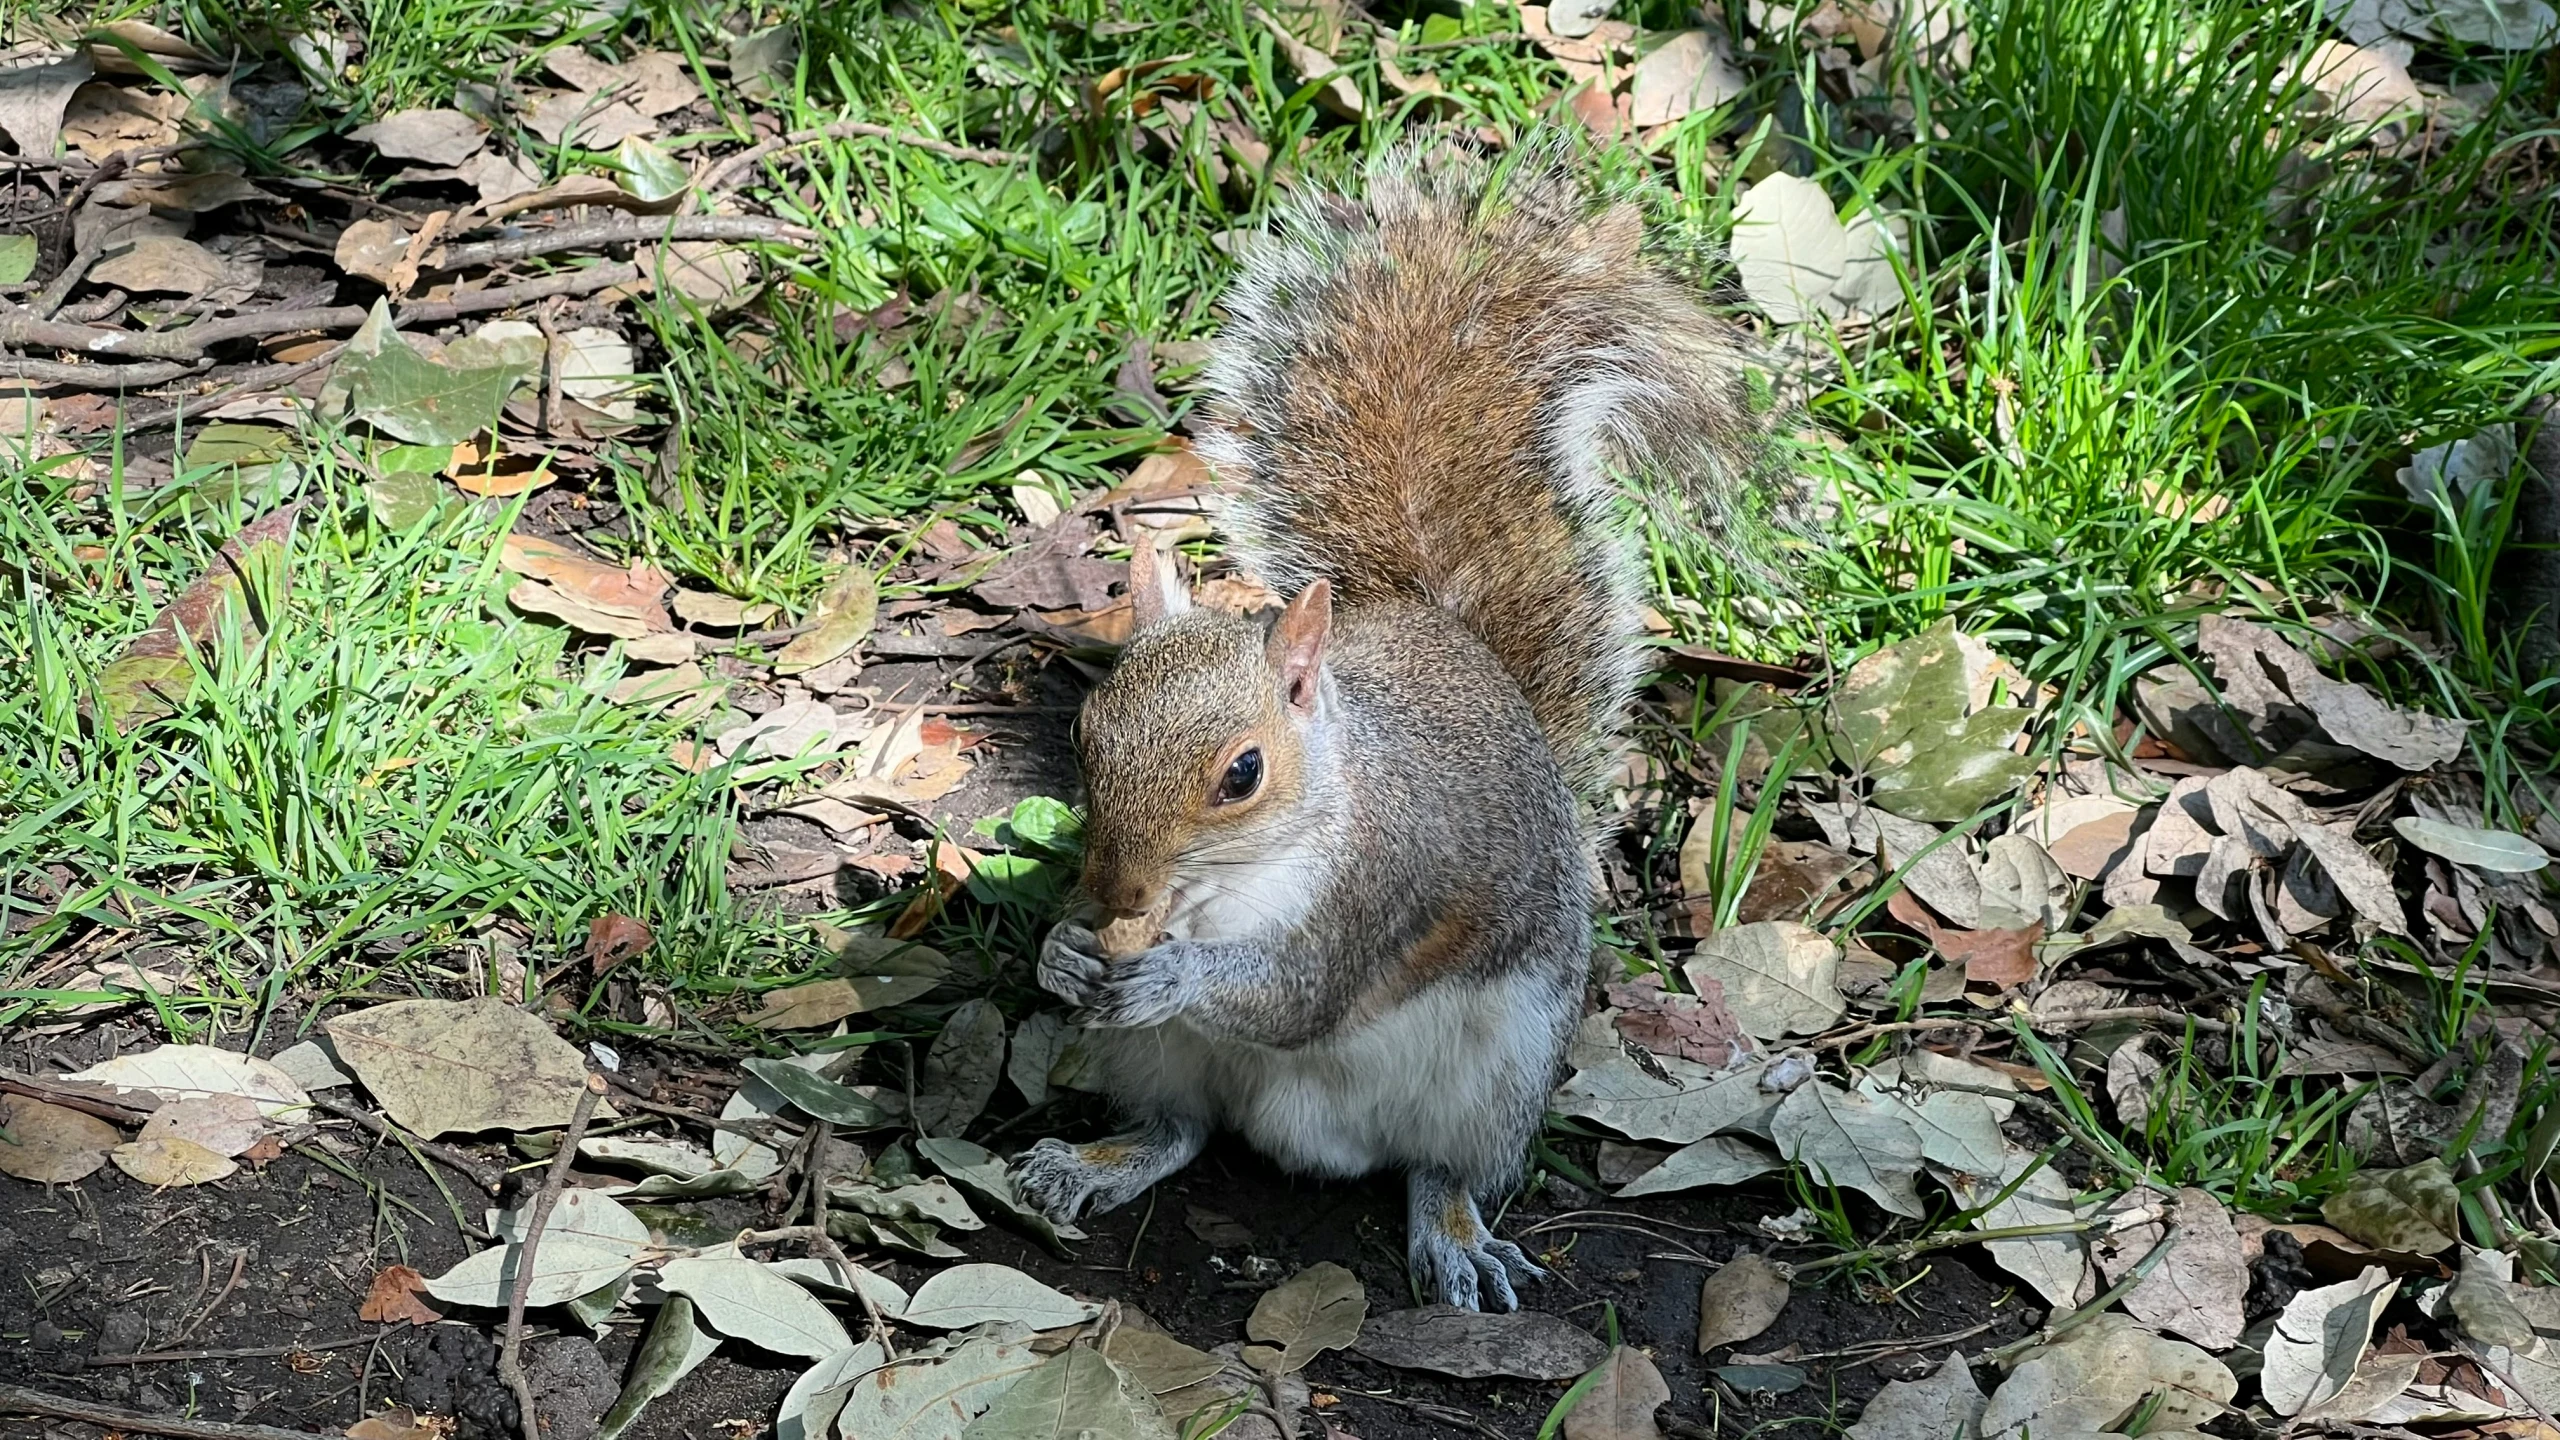 the squirrel is standing on leaves in the park